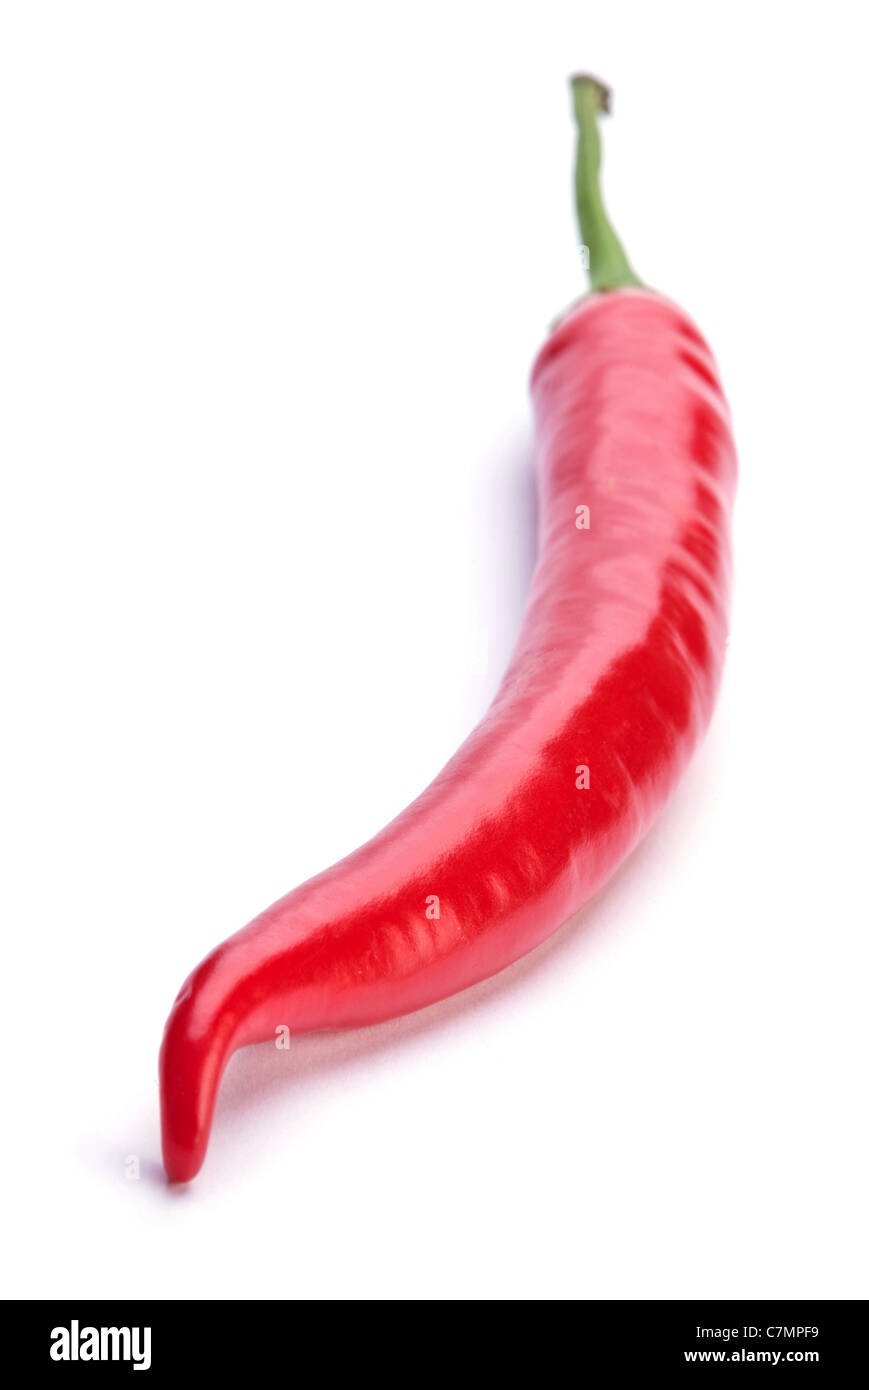 Red chili pepper vegetable on white background Stock Photo